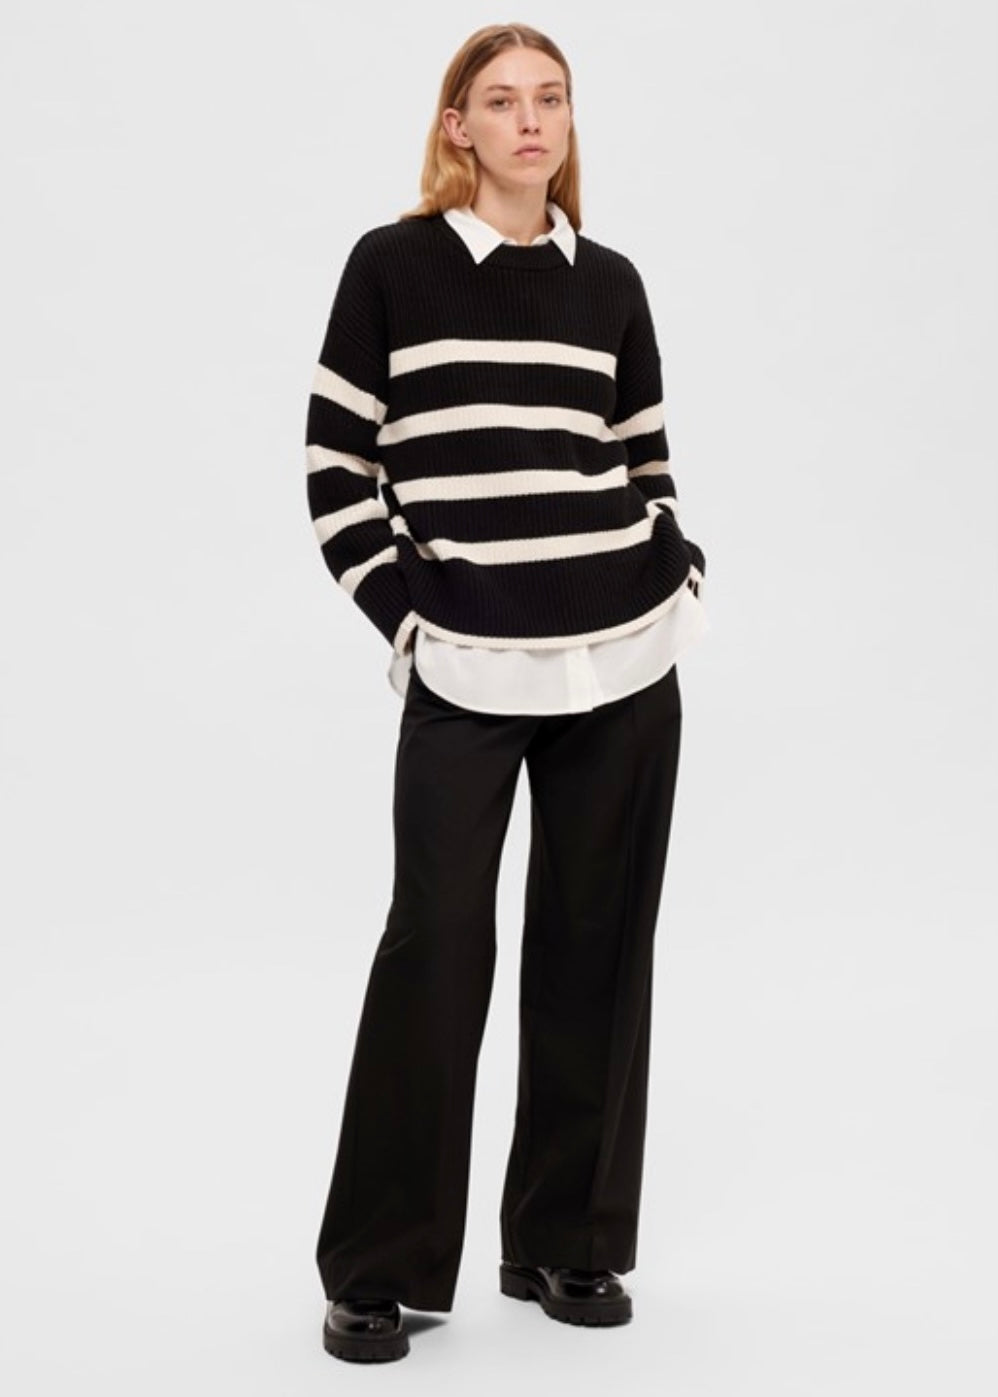 SELECTED FEMME - BLOOMIE LS KNIT O-NECK - BLACK/SNOW WHITE